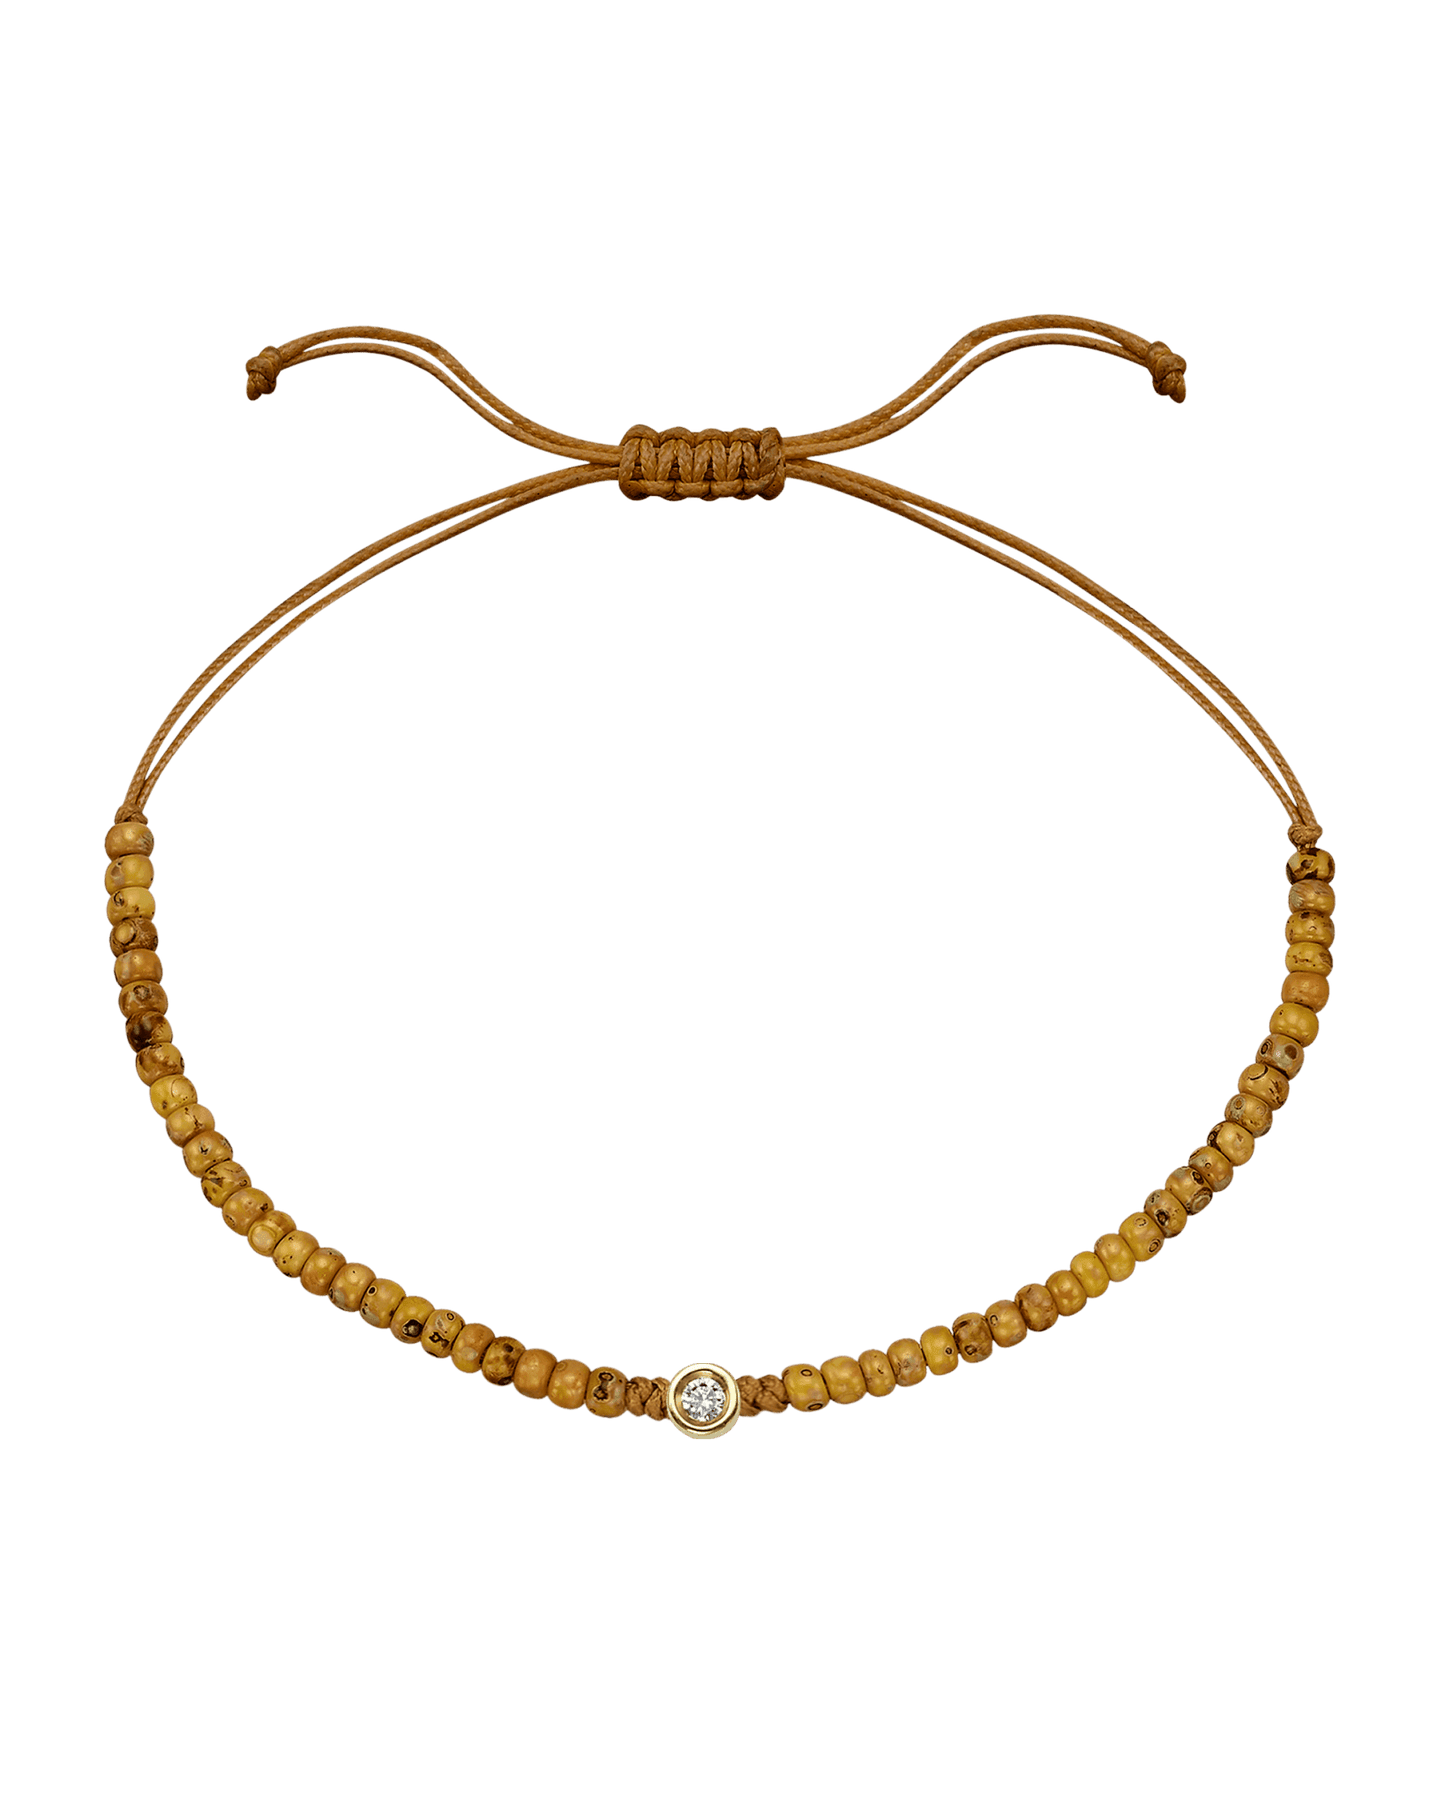 Dyed Beige Beads String Of Love - 14K Yellow Gold Bracelets magal-dev Small: 0.03ct 